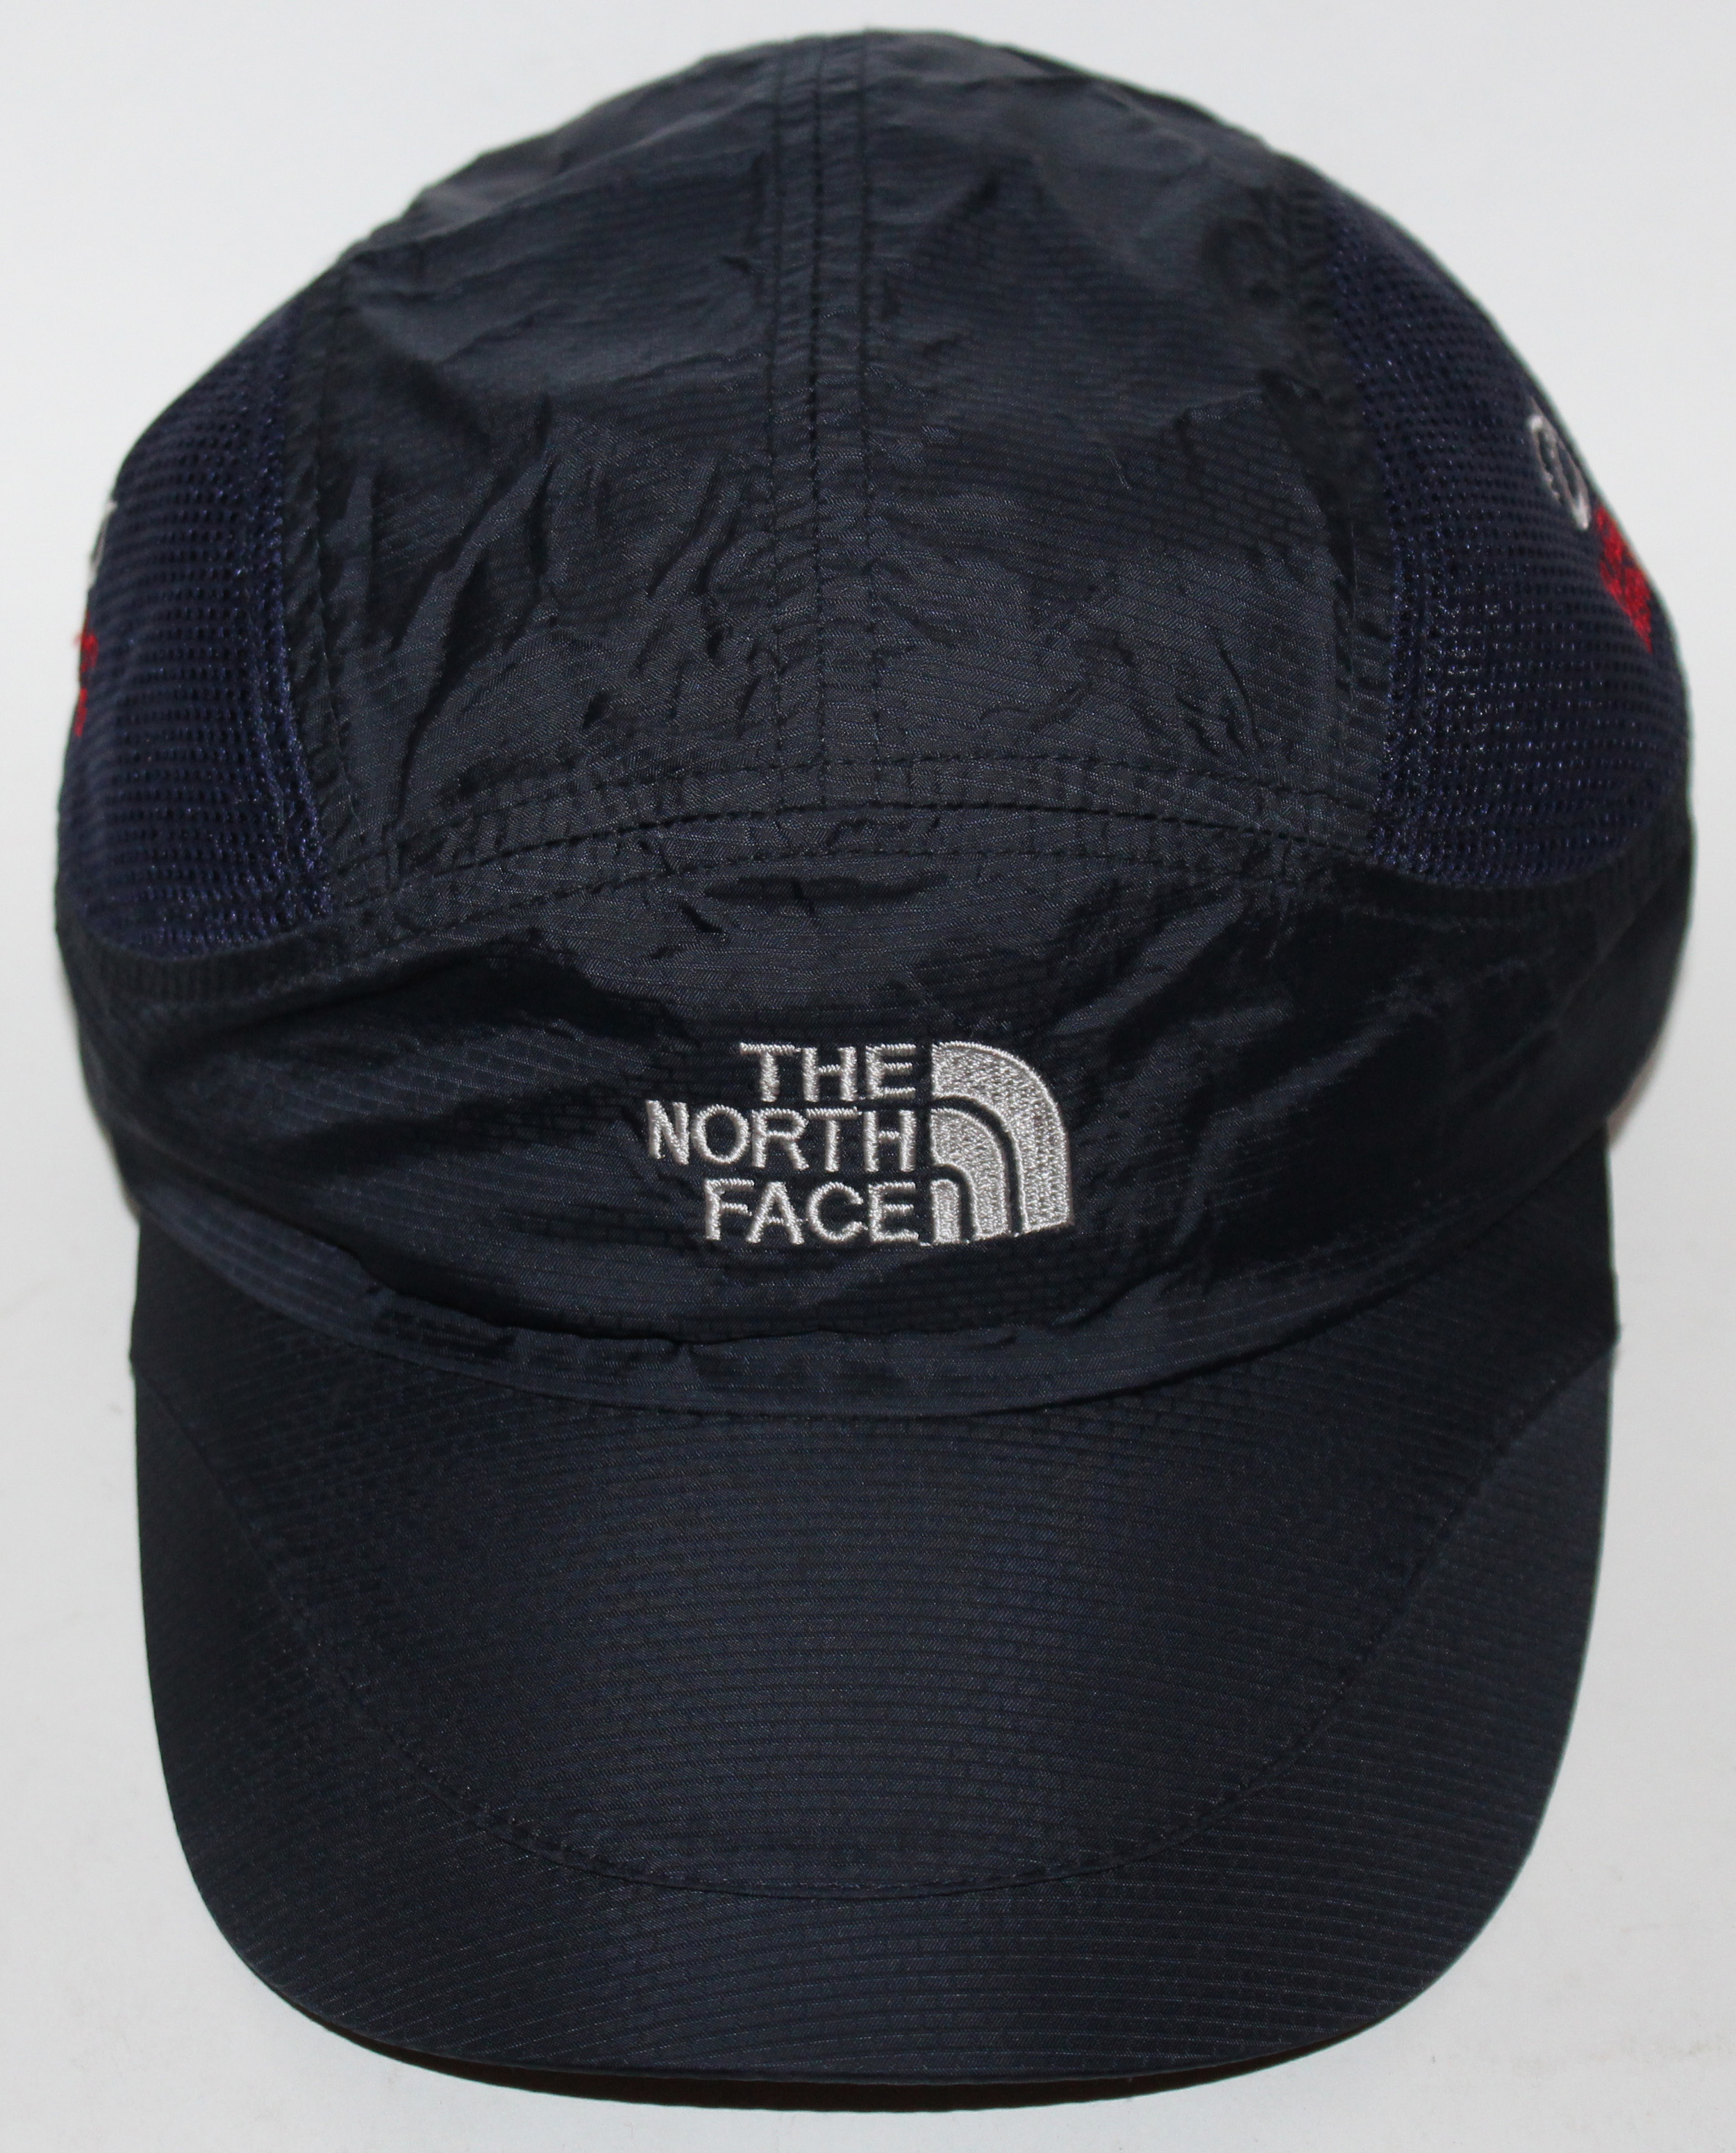 The North Face Flight Series Navy 5 Panel Mesh Hat — Roots